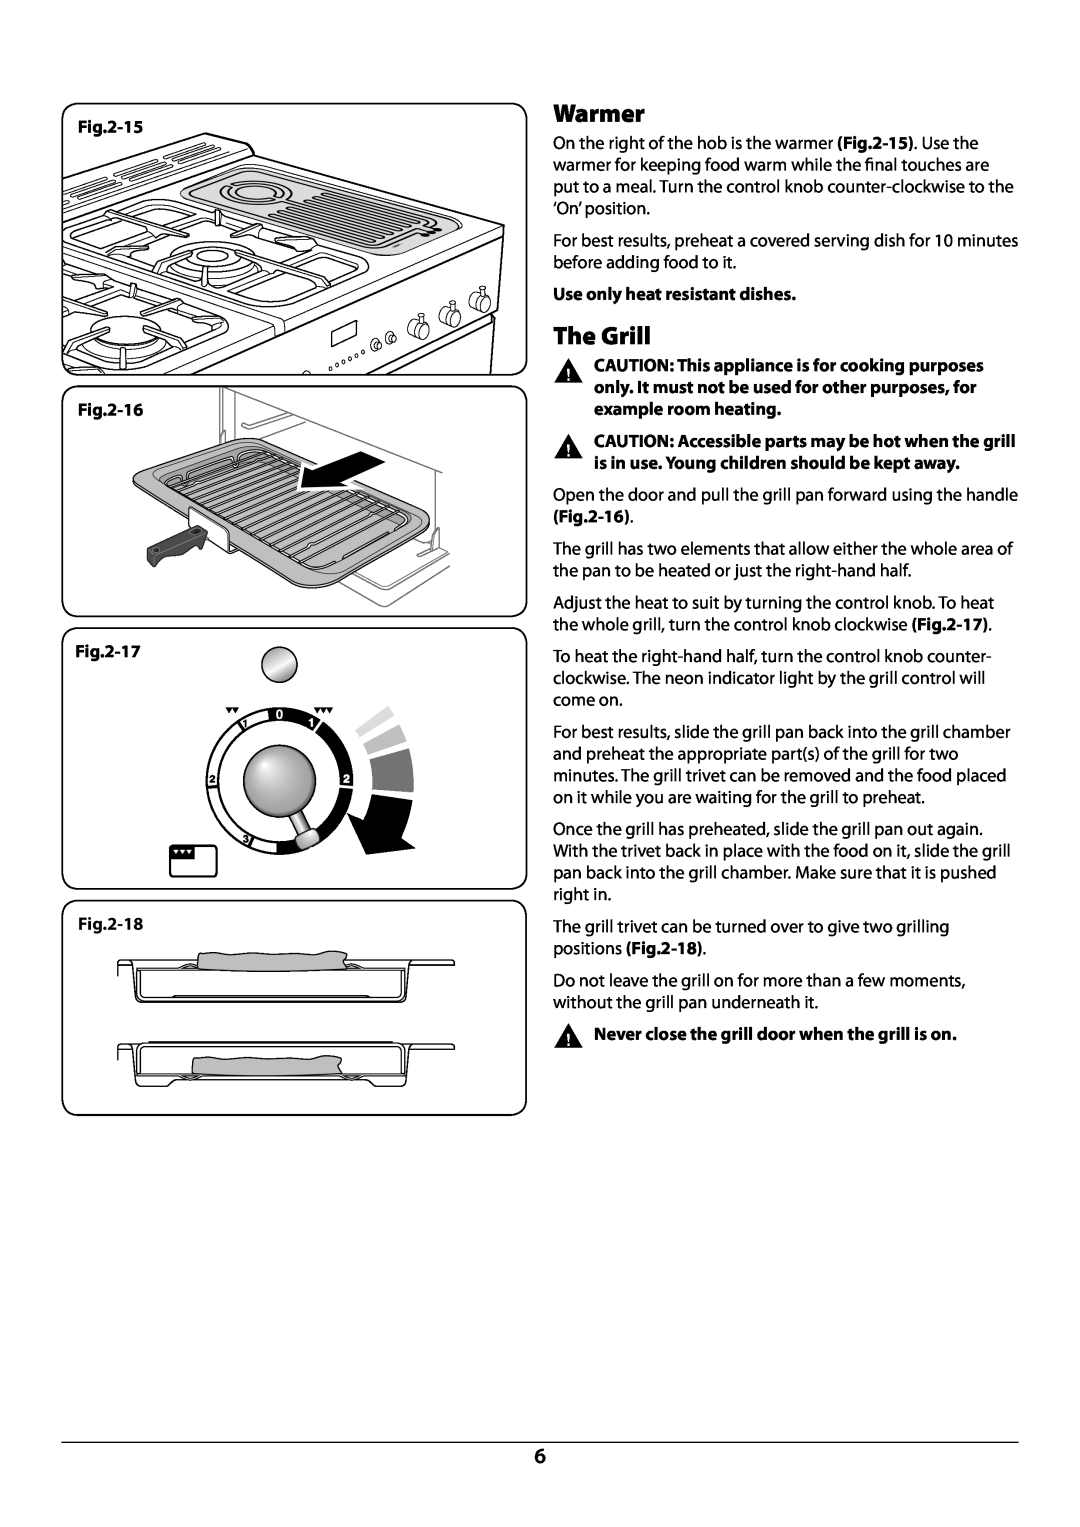 JVC toledo installation instructions ArtNo.210-0001 Classic grill control, 15 -16, Use only heat resistant dishes 